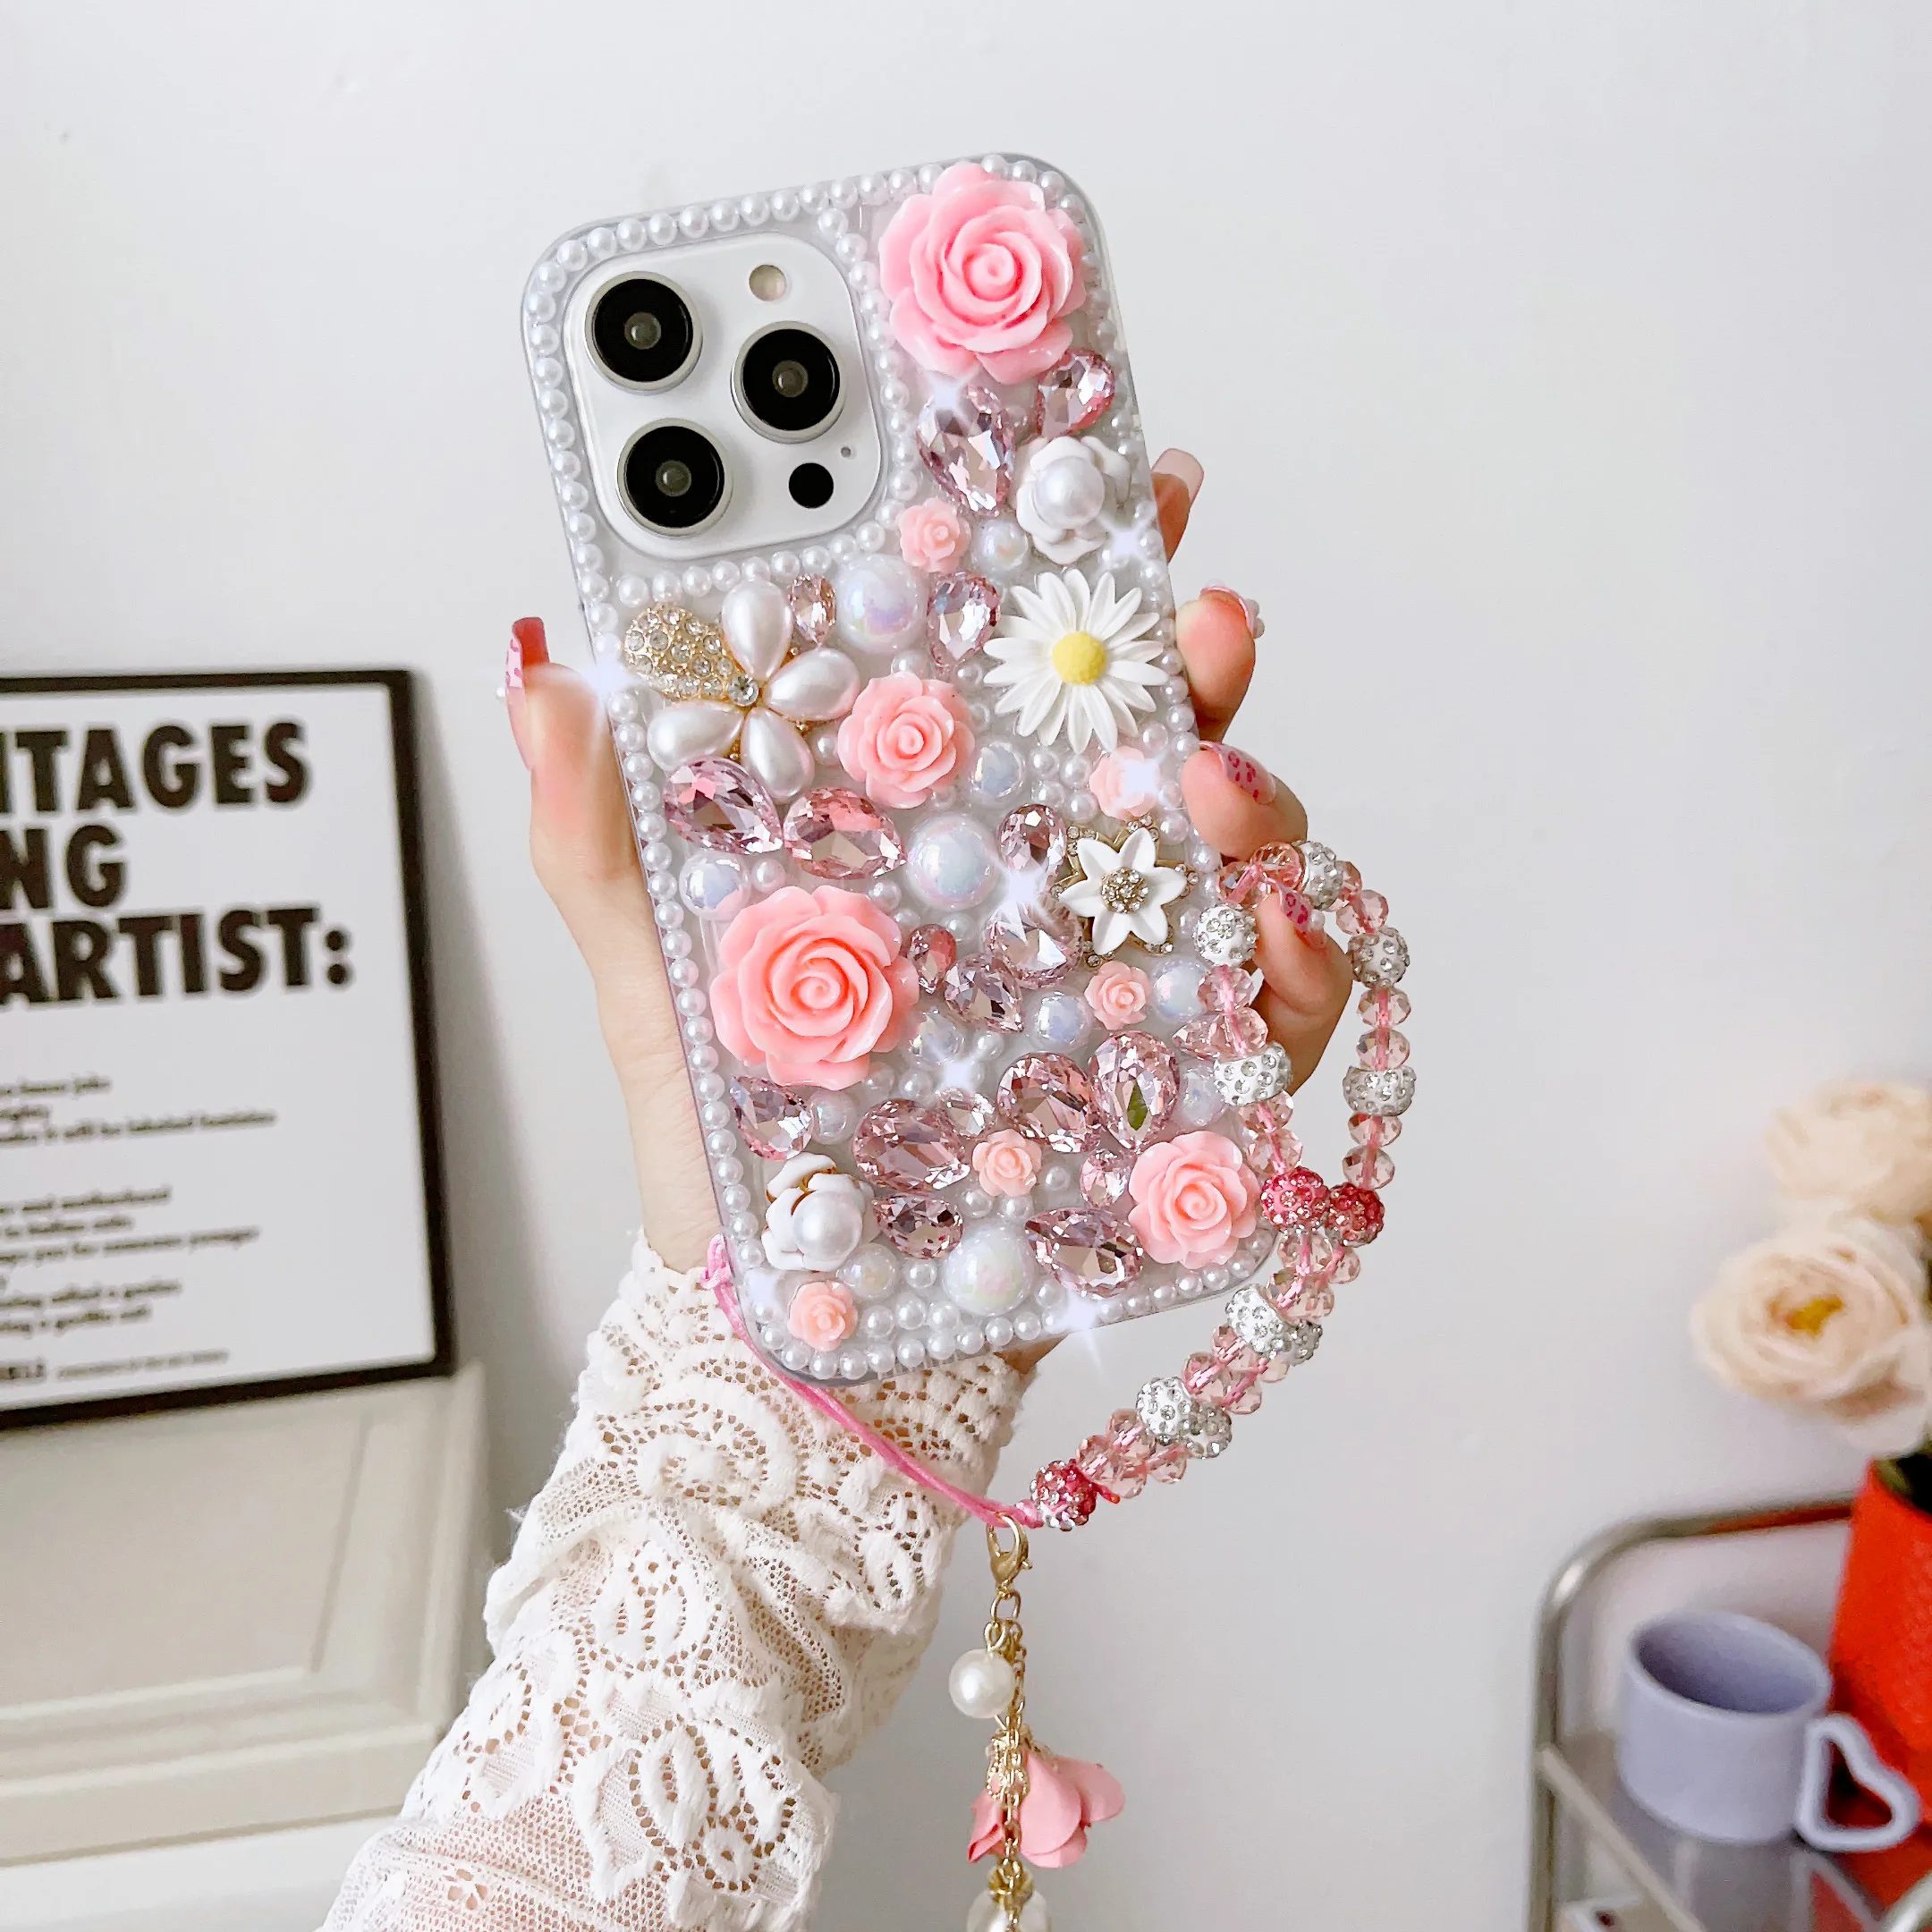 Crystal Flower Pearl Phone Case For iPhone d92a8333dd3ccb895cc65f: For 13promax|For iPhone 11|for iphone 11pro|for iPhone 11ProMax|For iPhone 12 12pro|for iphone 12promax|For iPhone 13Pro|For iPhone 14 13|For iPhone 14Plus|For iPhone 14Pro|for iPhone 14promax|For iPhone 15|For iPhone 15Pro|for iphone 15promax|for NOTE 20ultra|for s21 FE|For S21 Ultra|For S22 Plus|For S22 Ultra|for s23plus|for s23Ultra|for samsung NOTE20|For Samsung S20 FE|For Samsung S21|for samsung s21plus|For Samsung S22|for Samsung s23